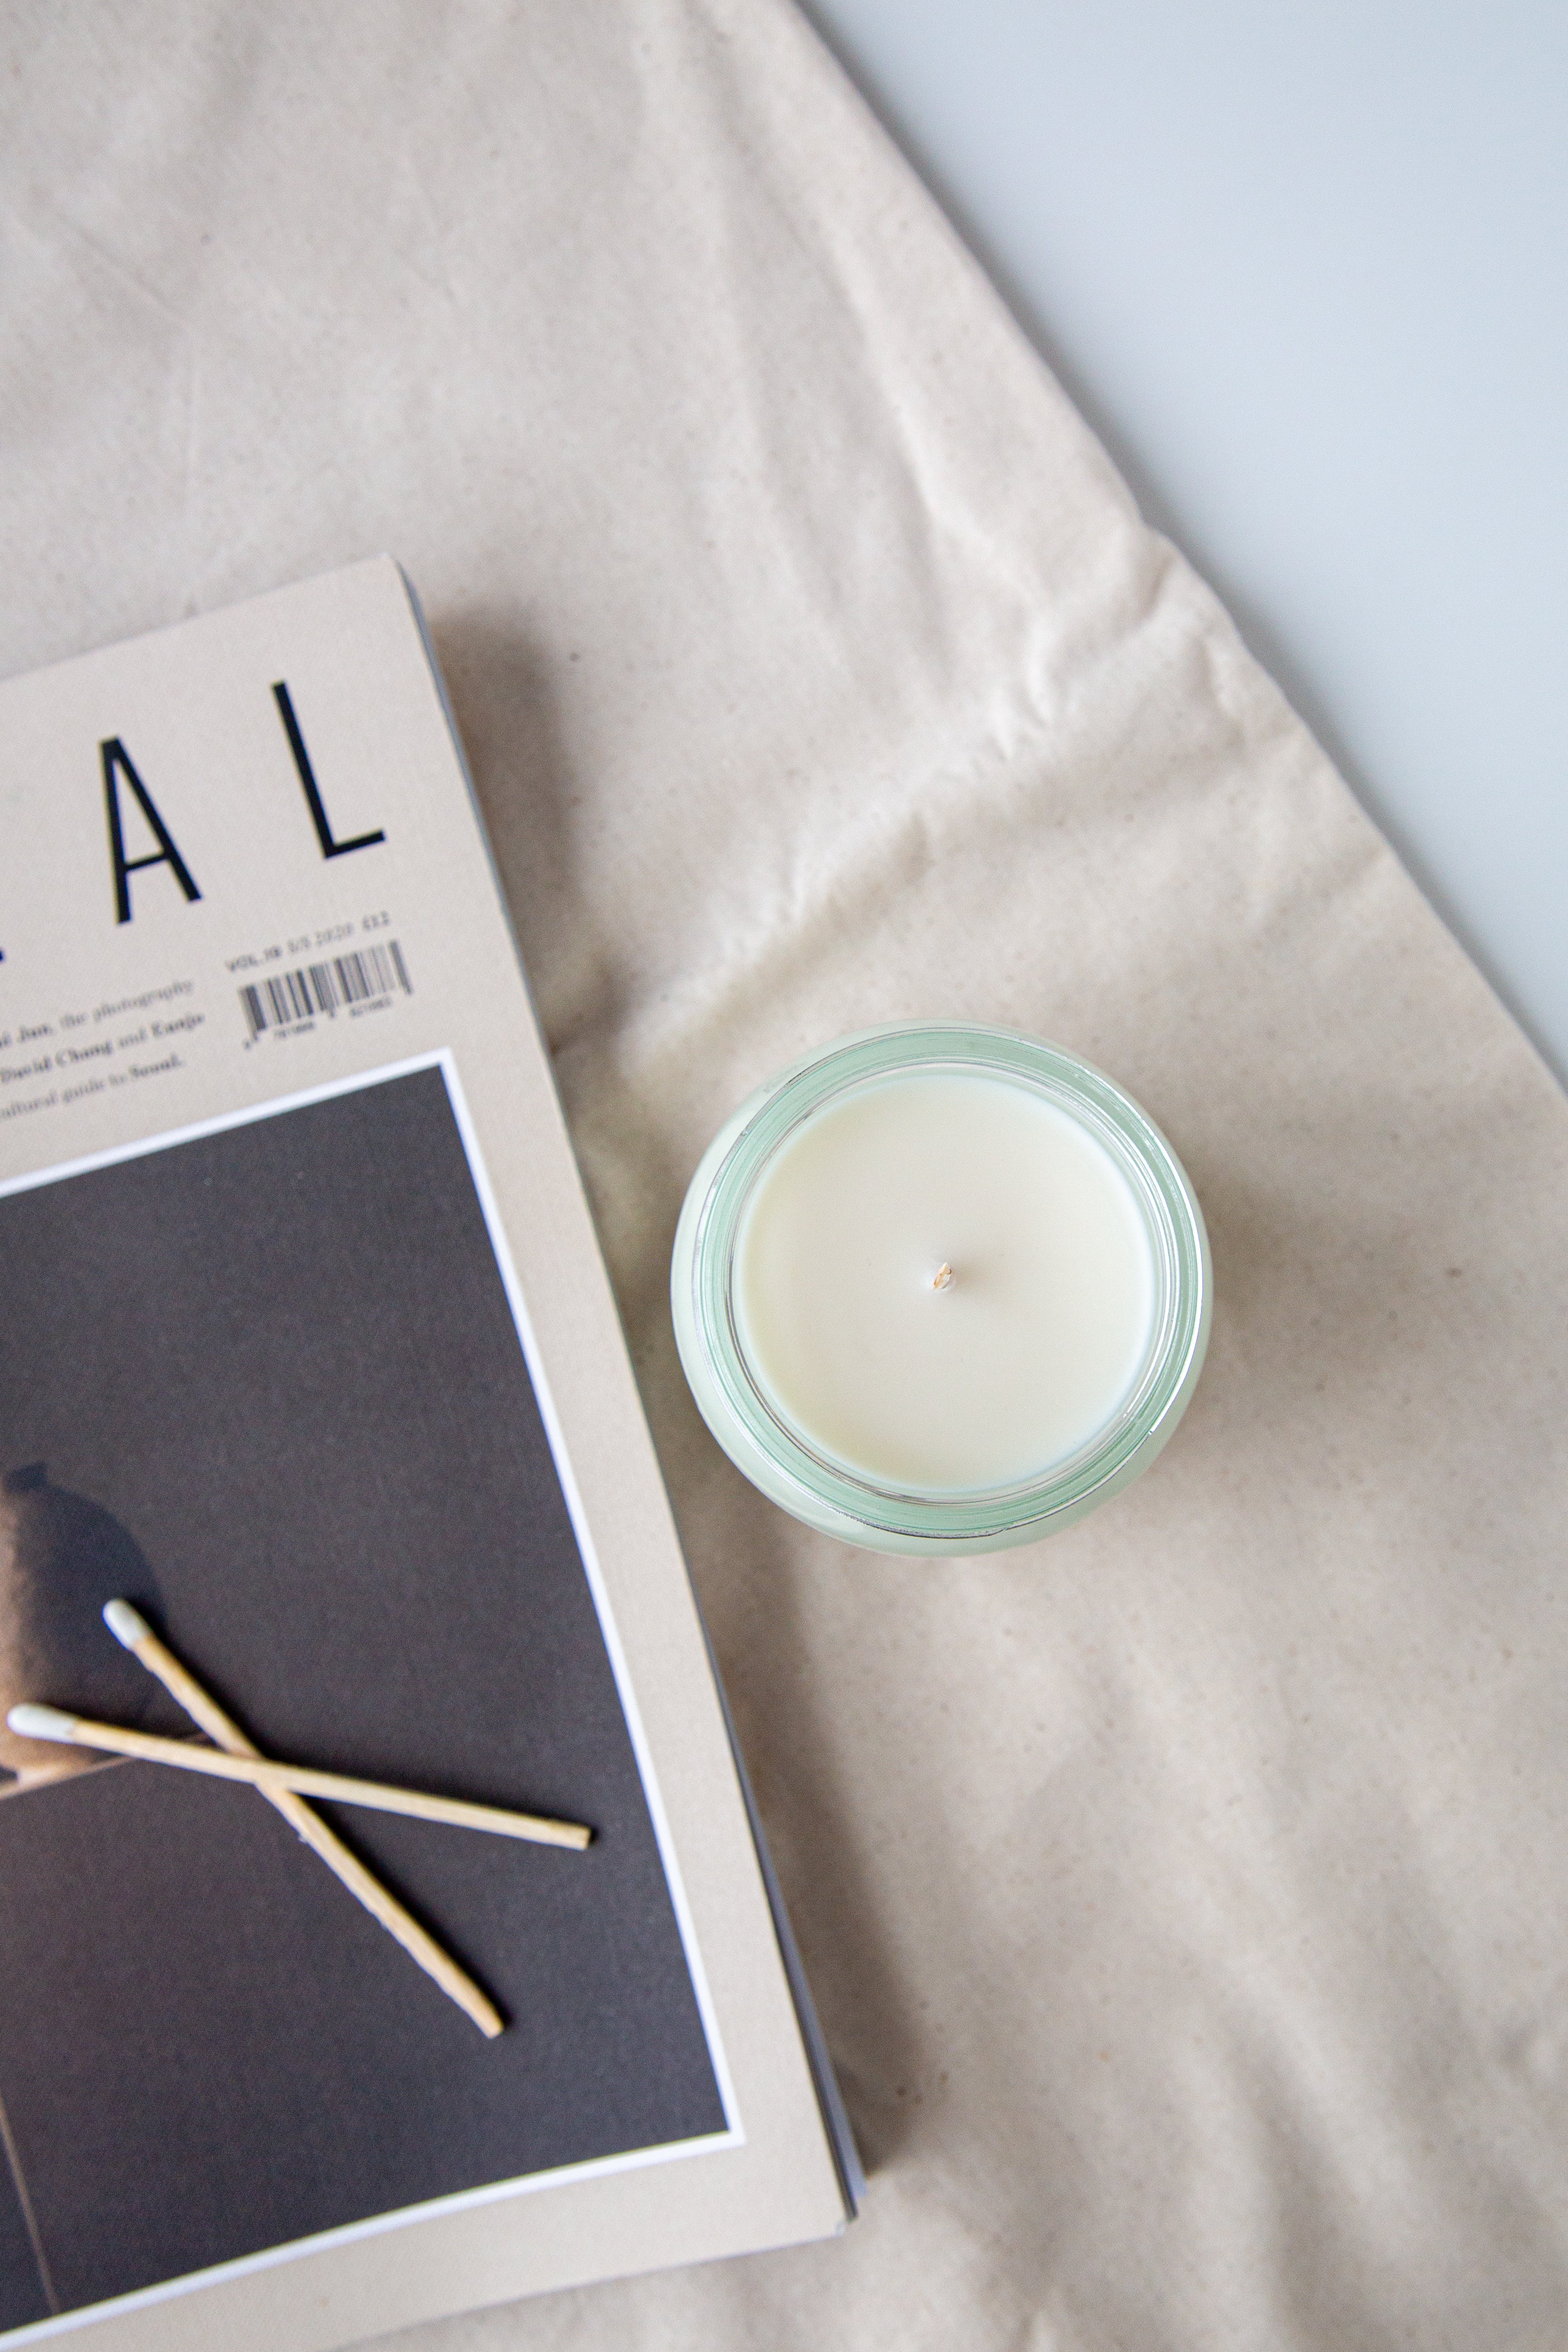 Sweater Weather (Pine + Clove) 300ml candle